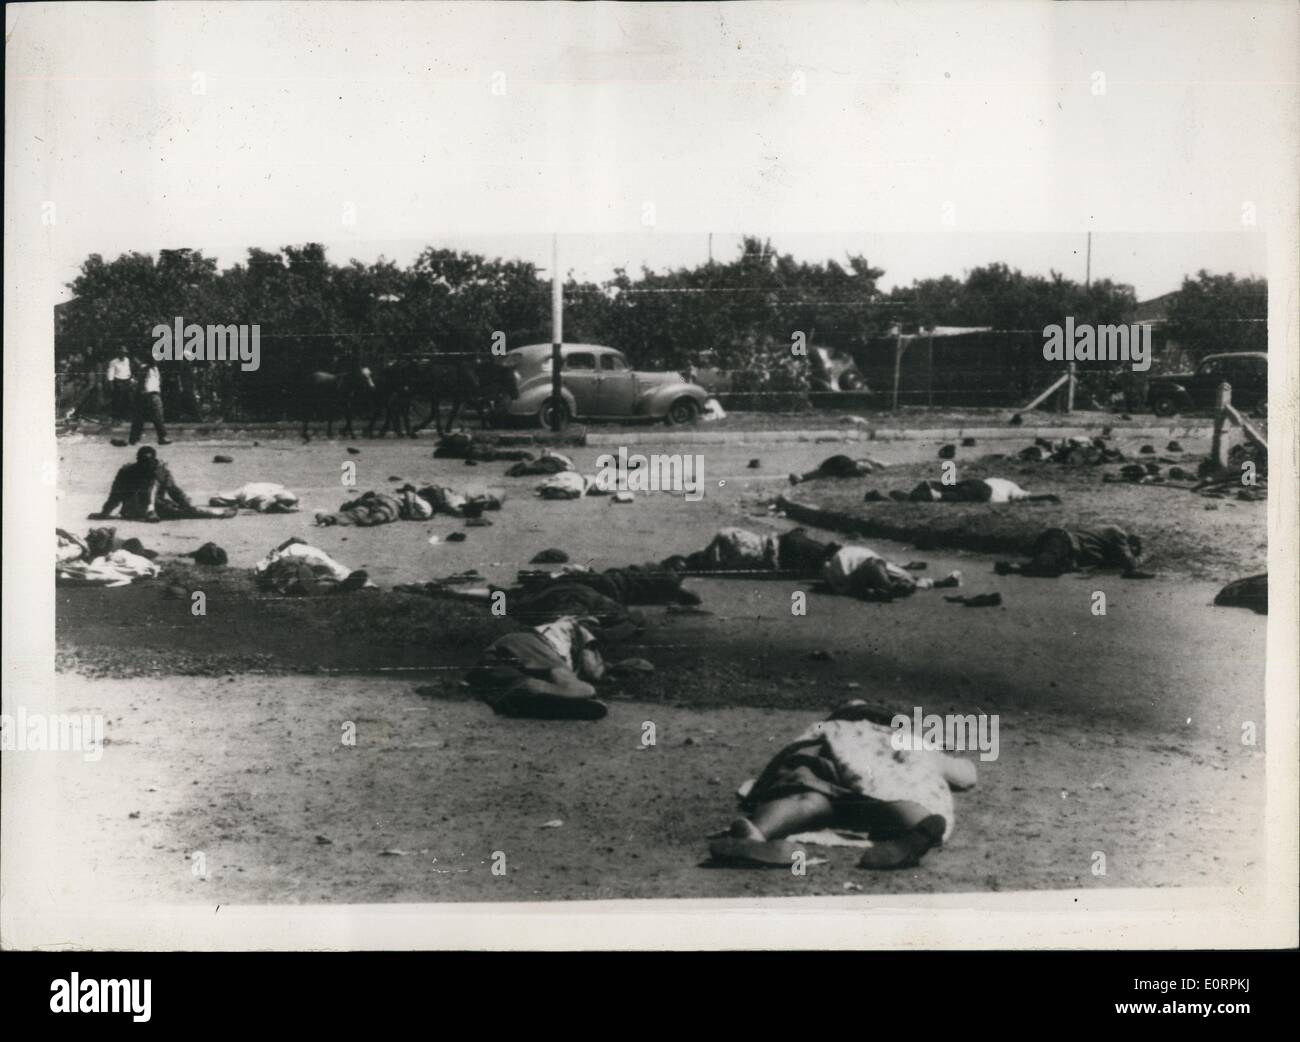 Mar. 03, 1960 - Thirty four Africans die in riots. Casualties after the shooting.: It is reported that thirty four Africans died today - and a further 100 wounded - when police opened fire on natives at Sharpeville, thirty miles from Johannesburg. The rioting started during the native campaign against the rule of forcing them to carry passes. Africans screaming ''Africa'' besieged the local police station for several hours. Jet aircraft which screamed overhead in an attempt to frighten the Africans only made them more angry Stock Photo